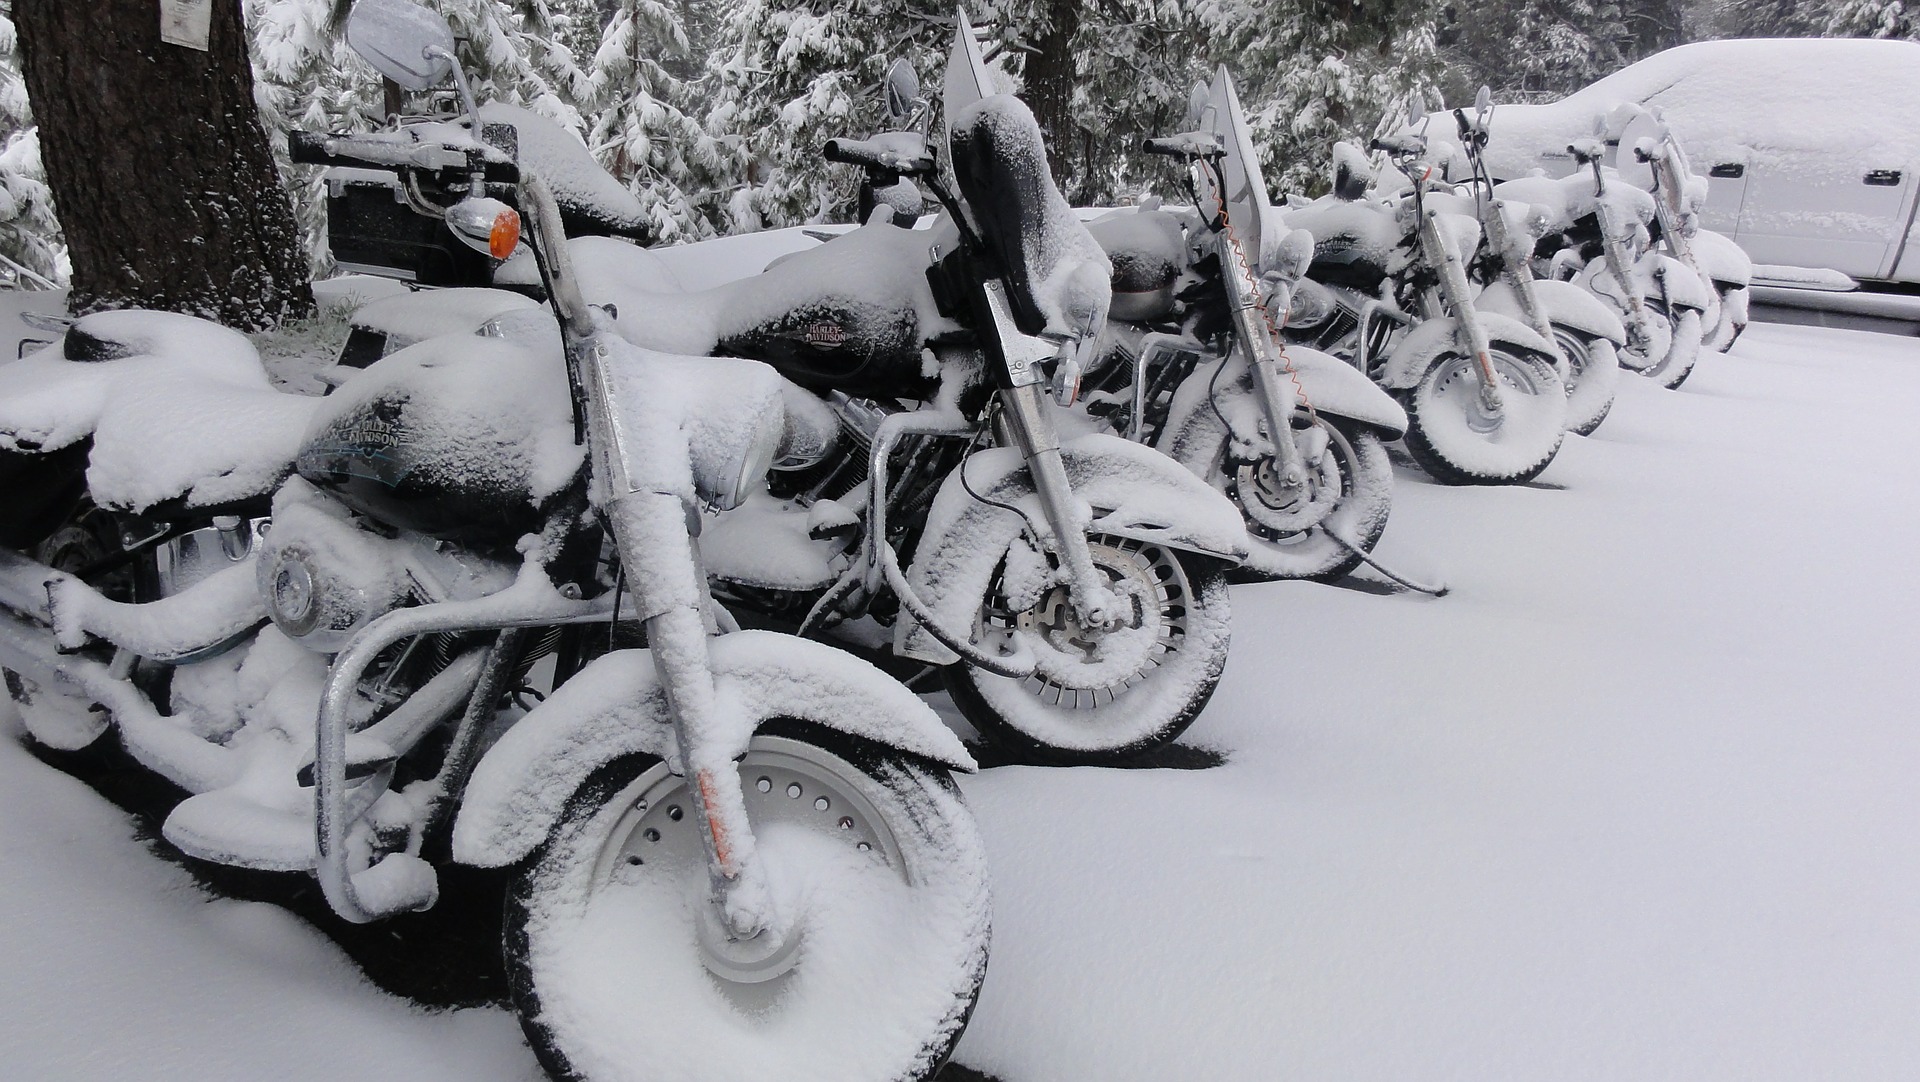 Top Tips for Winter Motorcycle Riding